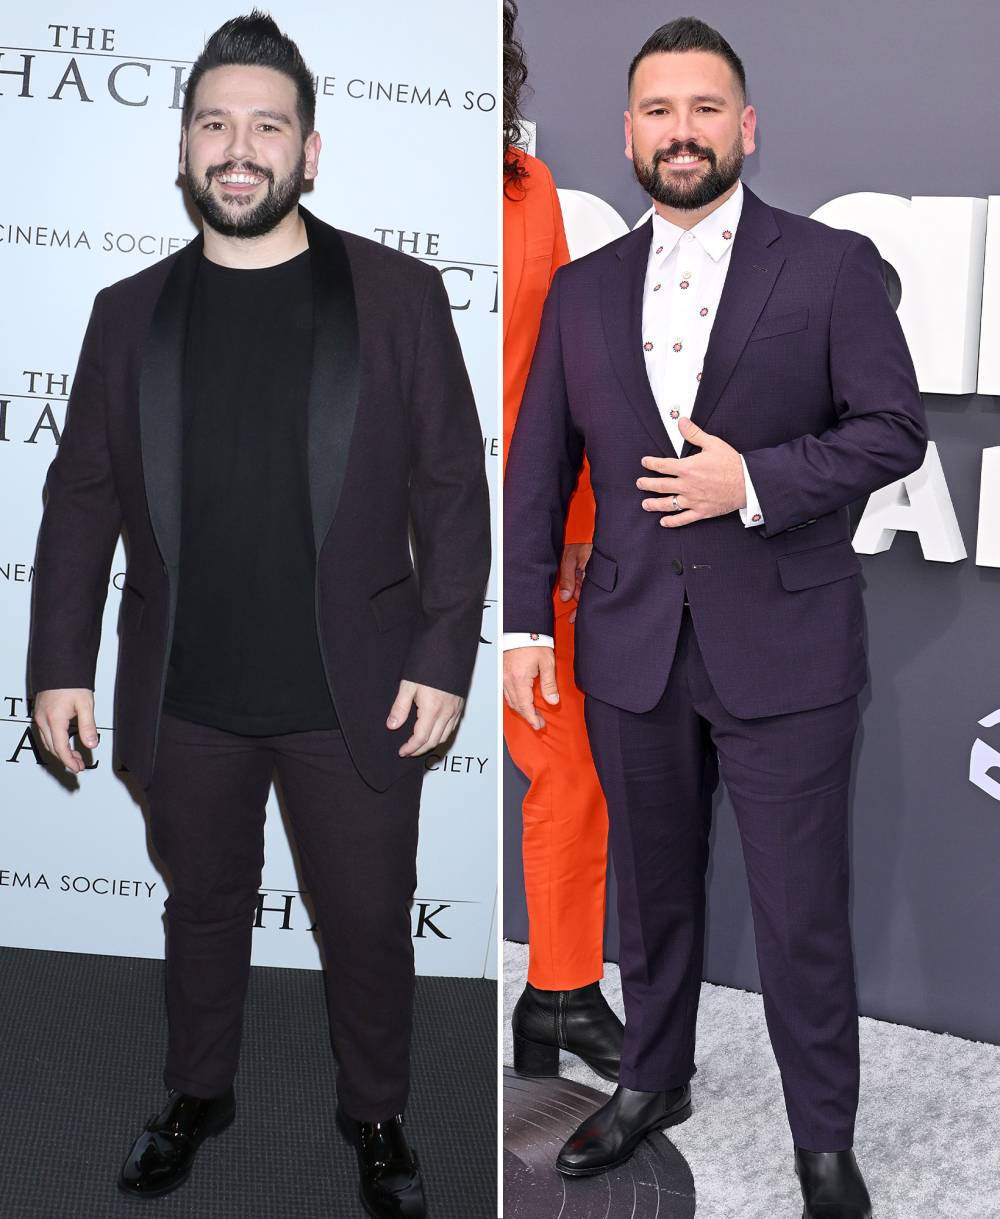 Dan + Shay’s Shay Mooney Reveals He Lost 50 Lbs in 5 Months- ‘I’ve Literally Never Felt Better’ Promo- Dan + Shay’s Shay Mooney Has ‘Never Felt Better’ After 50 Lb Weight Loss 024